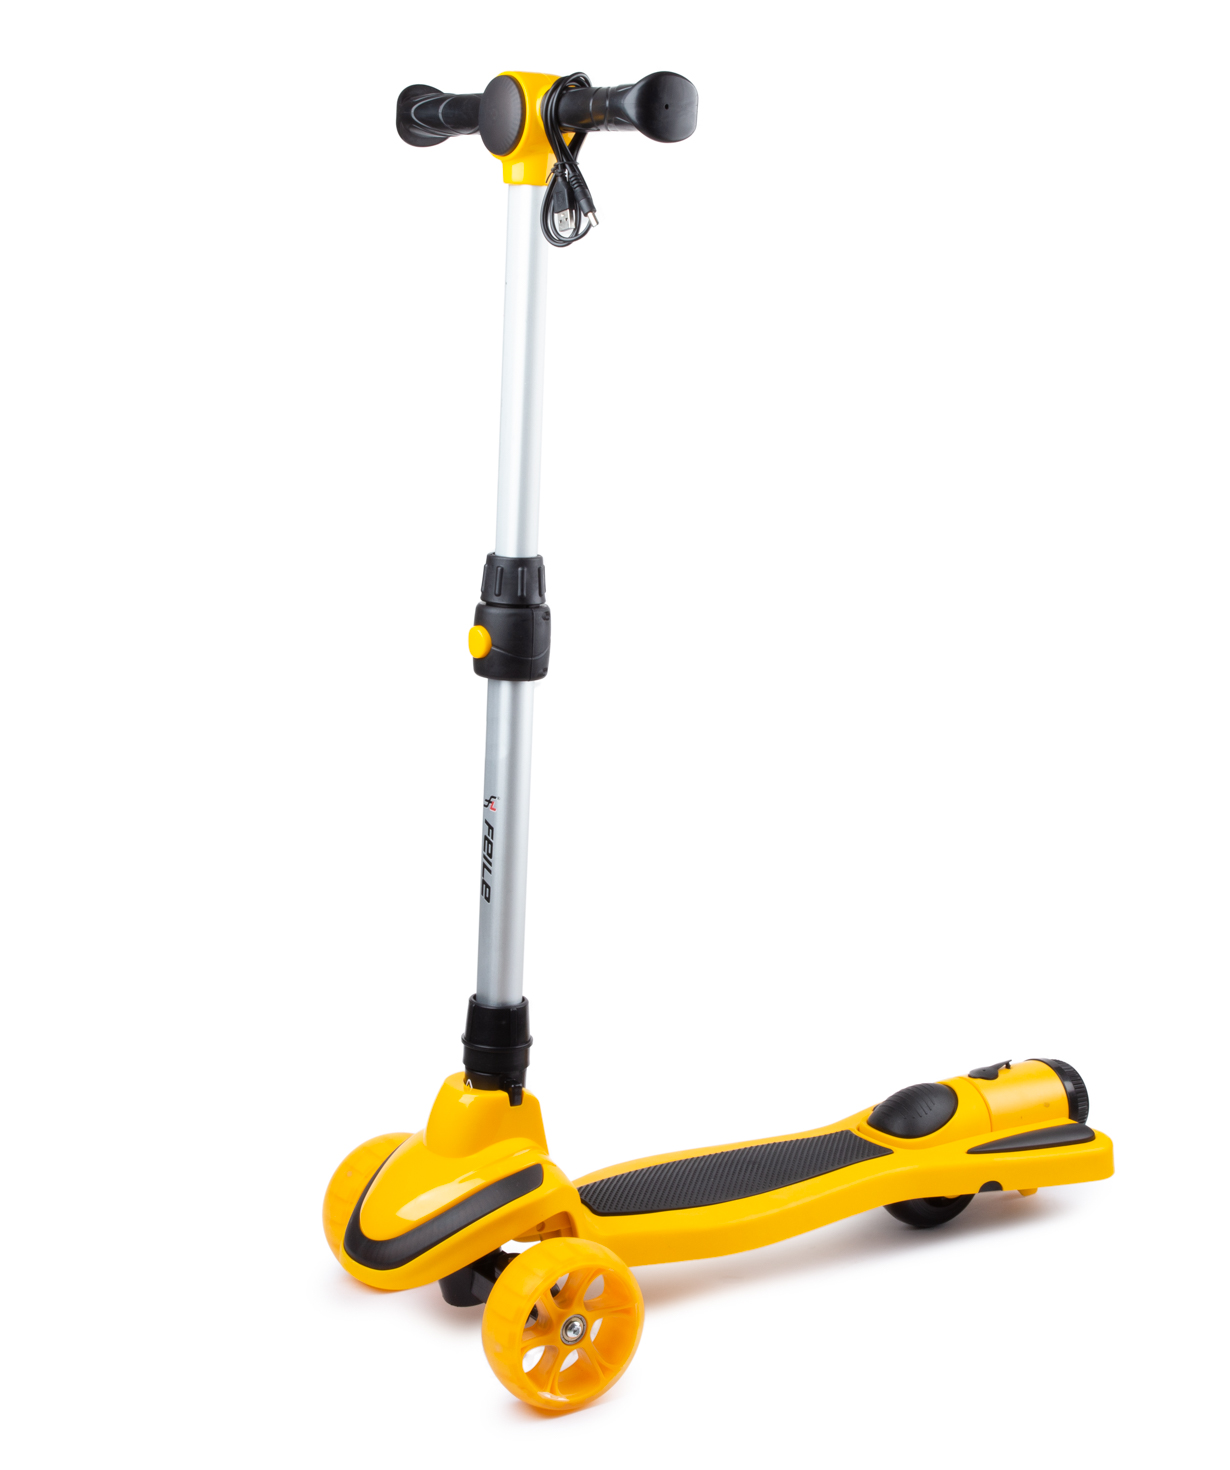 Scooter PE-15082 with light effect, steam and sound signal